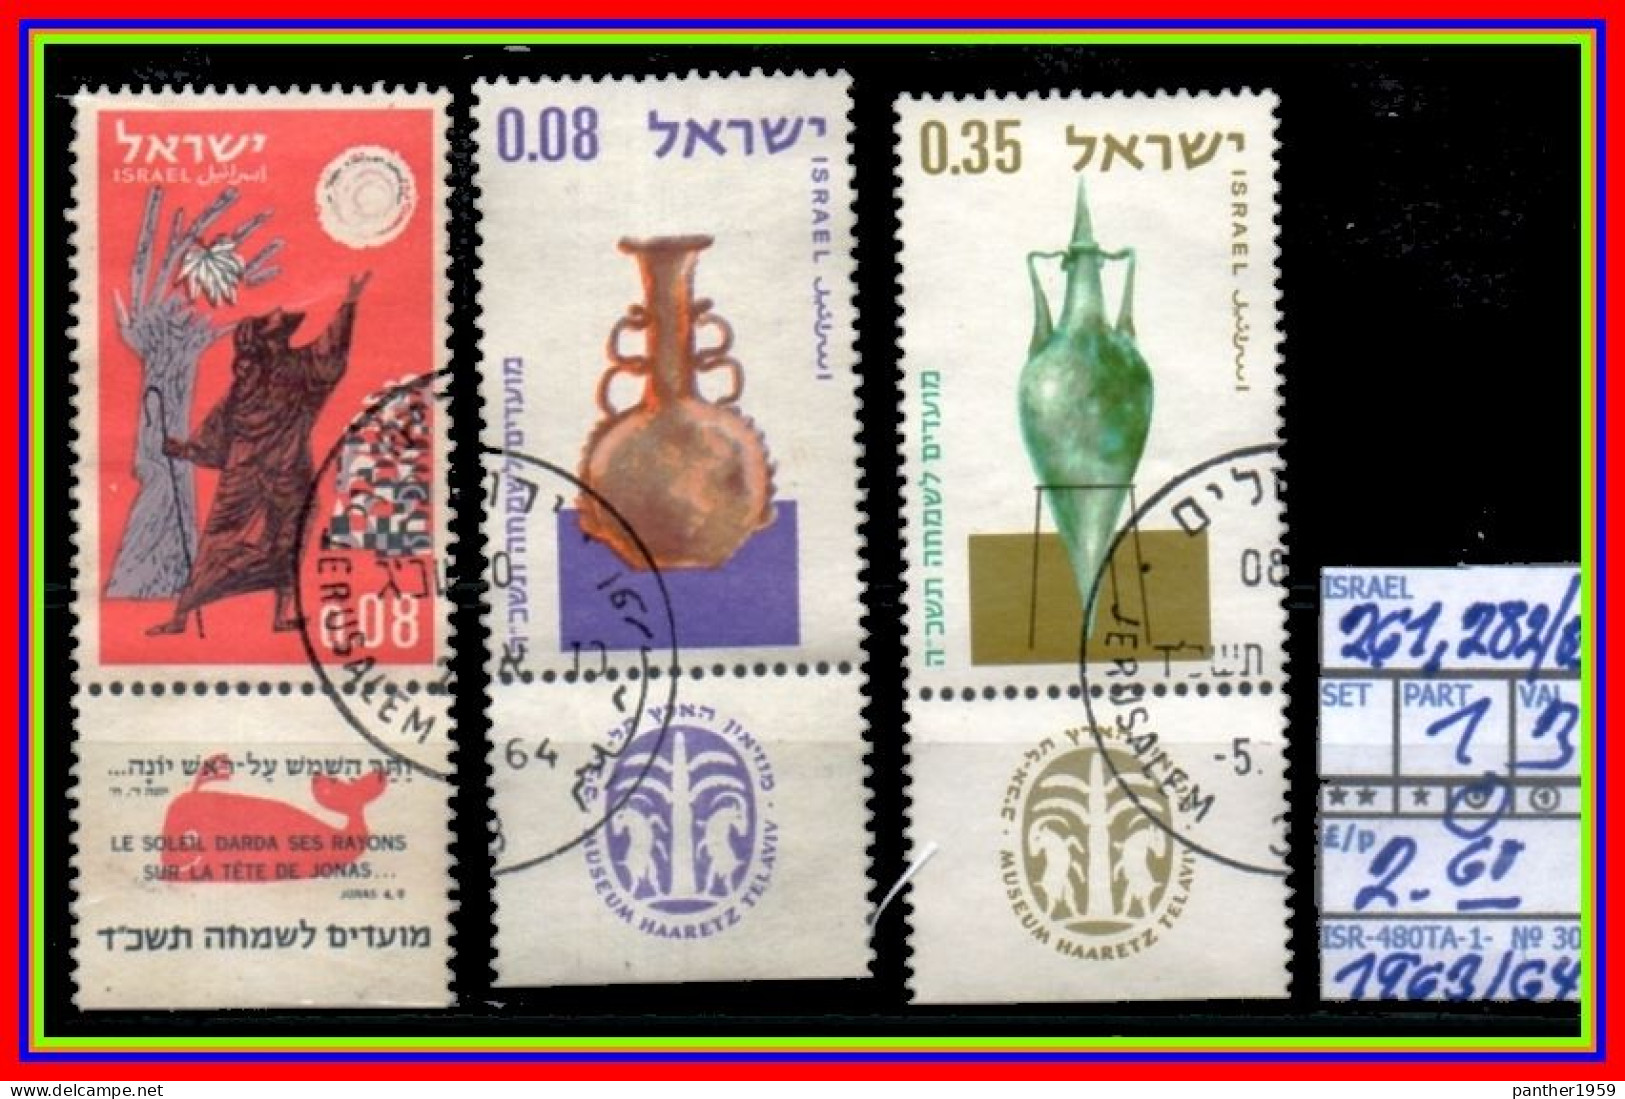 ASIA# ISRAEL# #COMMEMORATIVE SERIES WITH TABS# USED¤ (ISR-280TA-1) (30) - Usados (con Tab)